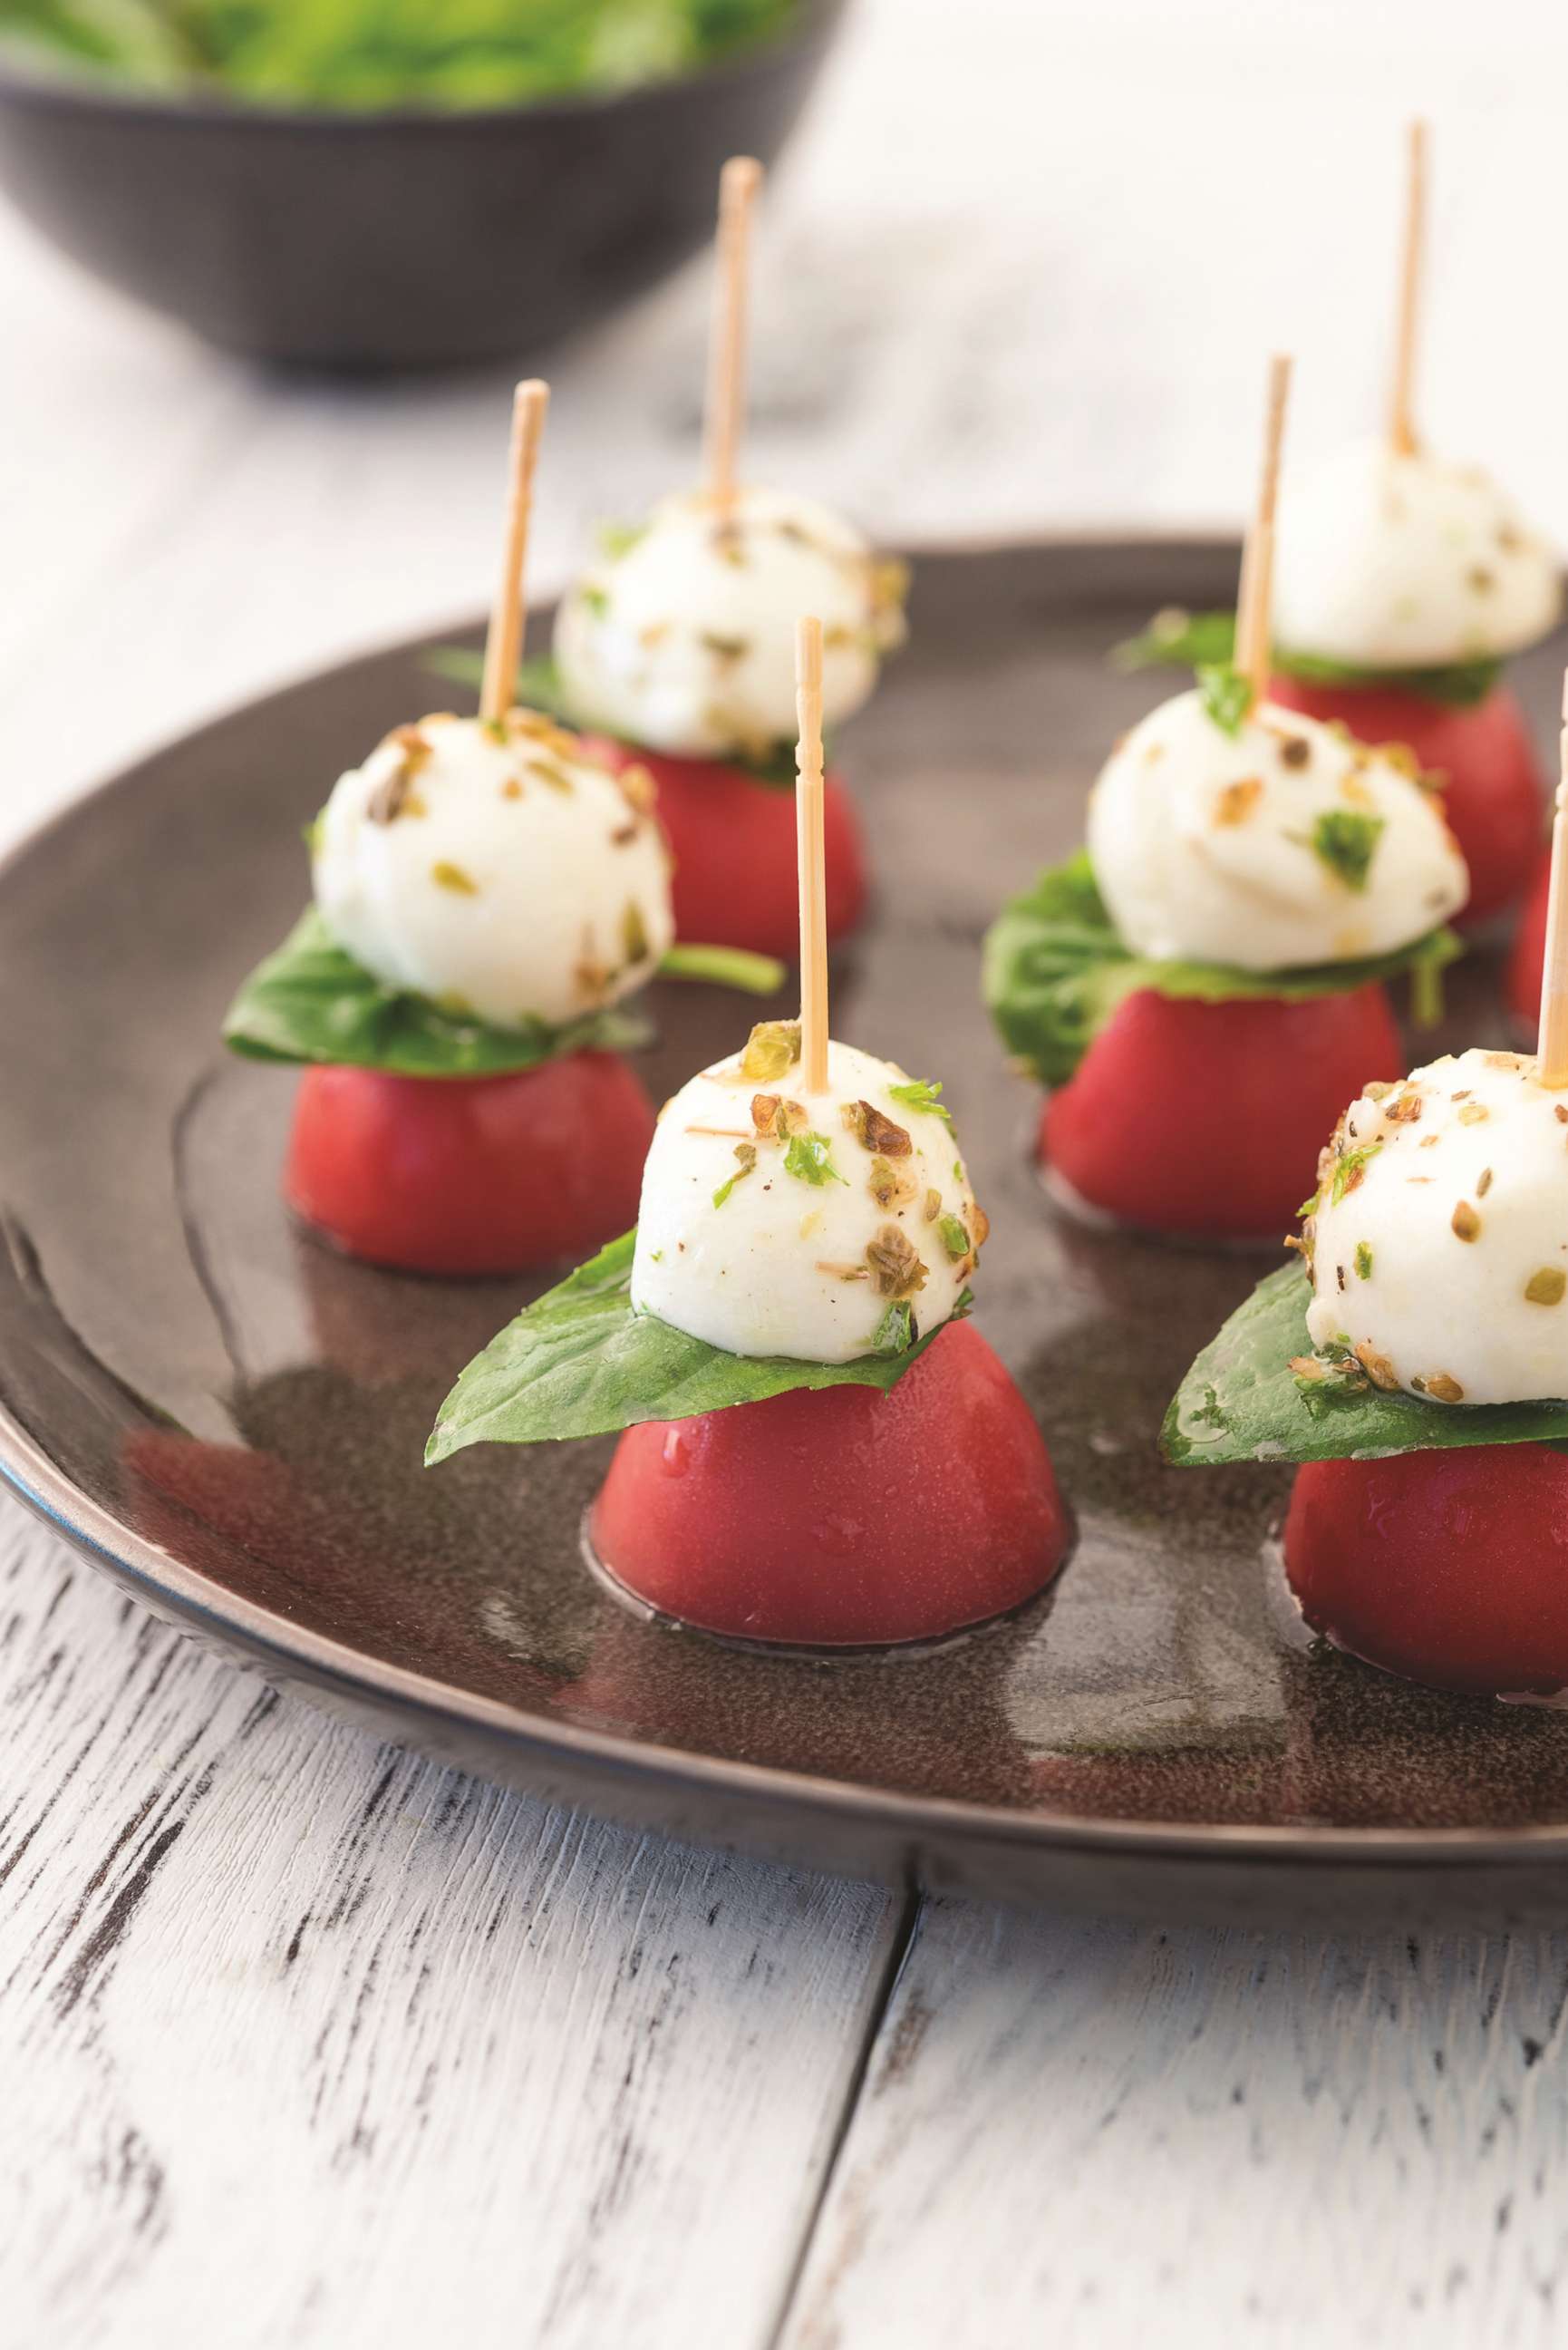 PHOTO: "Simply Keto" author Suzanne Ryan's recipe for caprese skewers.